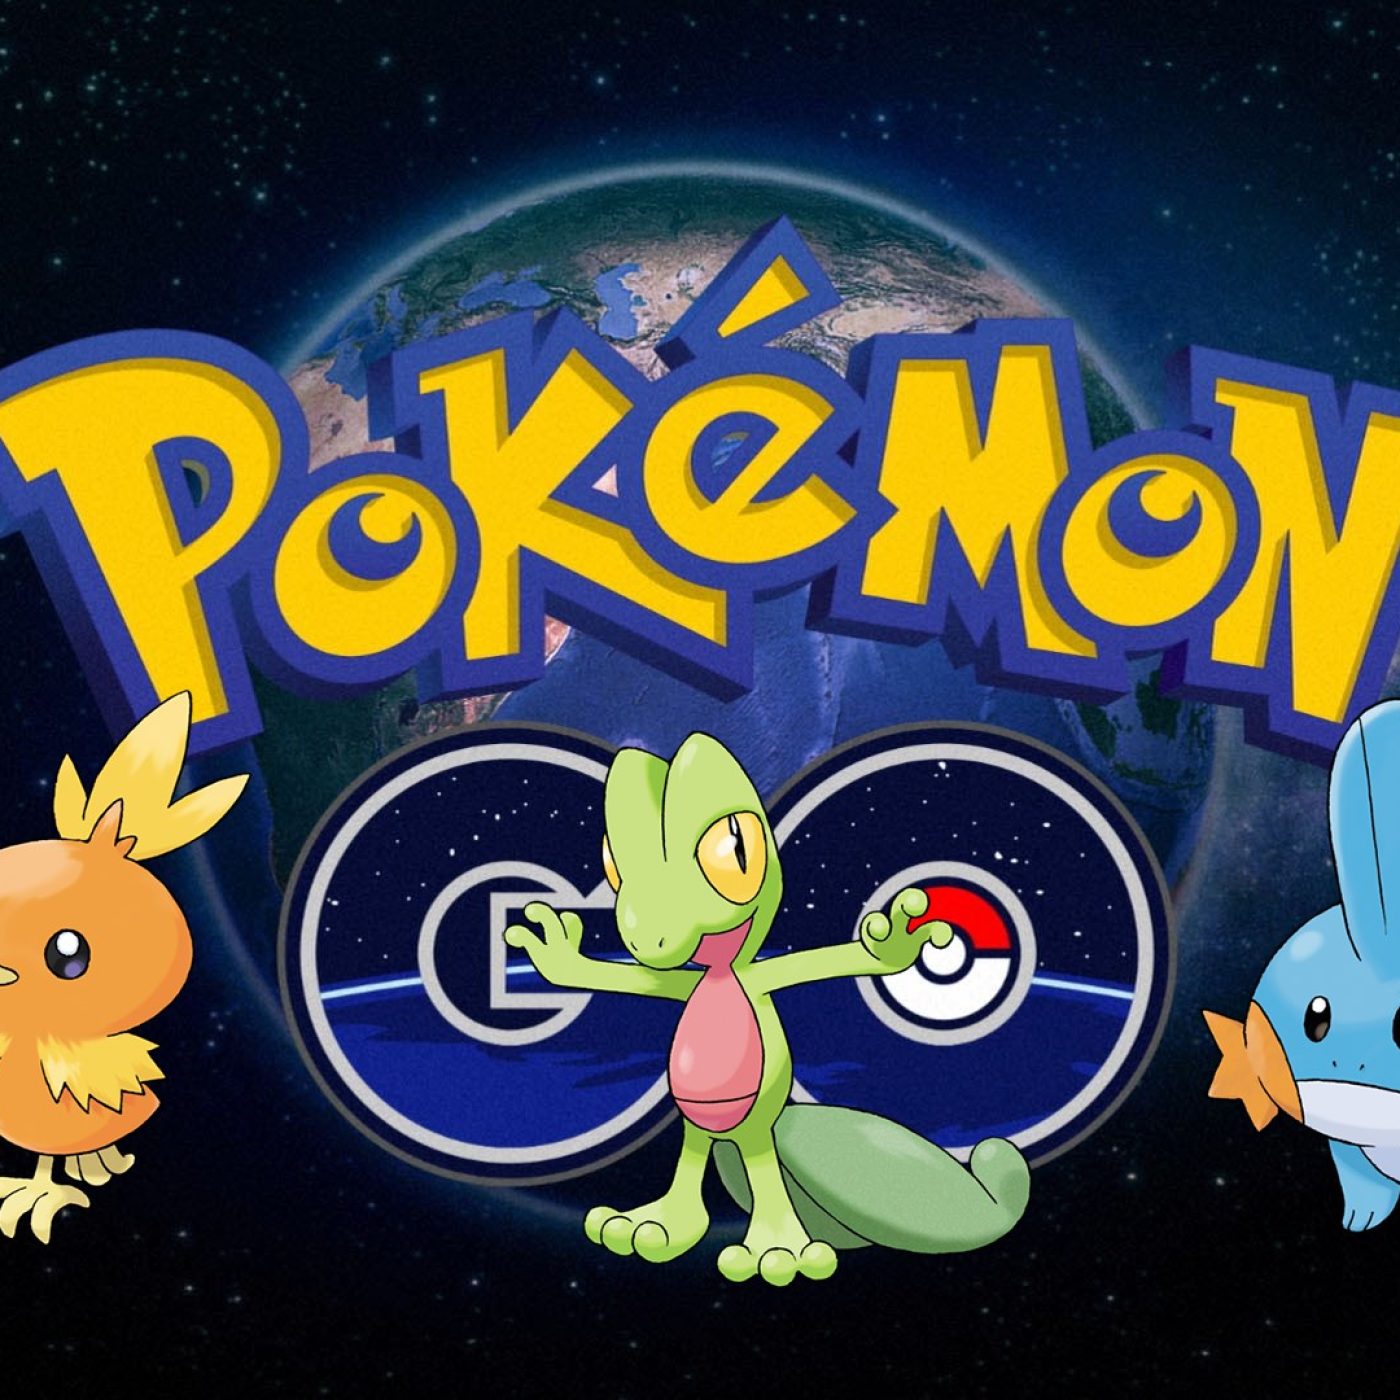 Download Pokemoon – Emerald Version APK v2.0 for Android